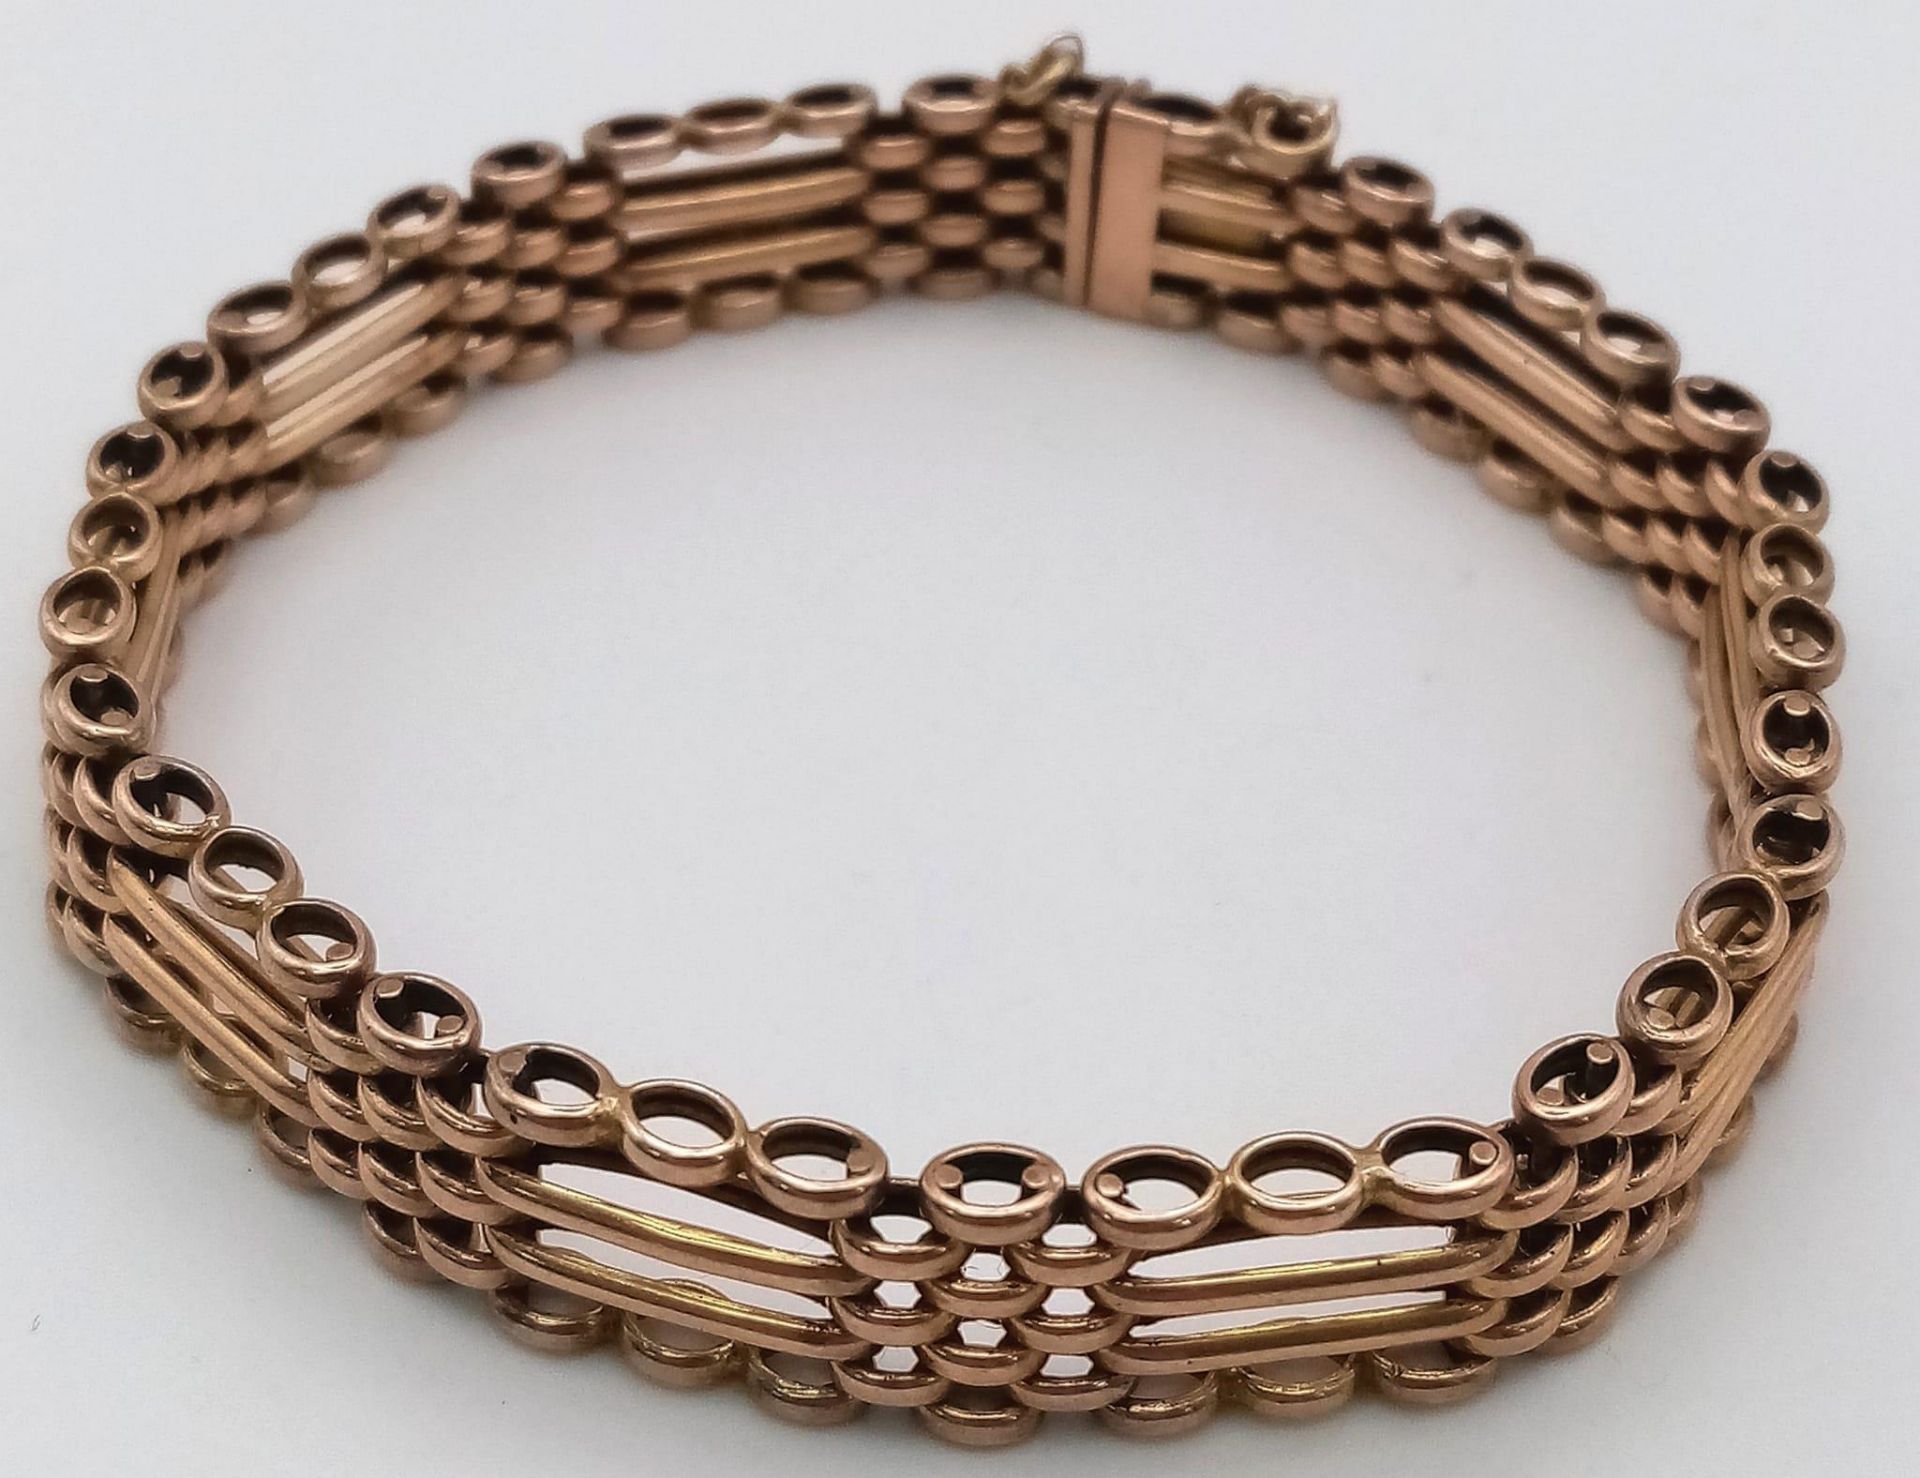 A FOUR ROW VINTAGE SEMI GATE BRACELET IN 9K ROSE GOLD WITH SAFETY CHAIN .17.1gms - Image 3 of 5